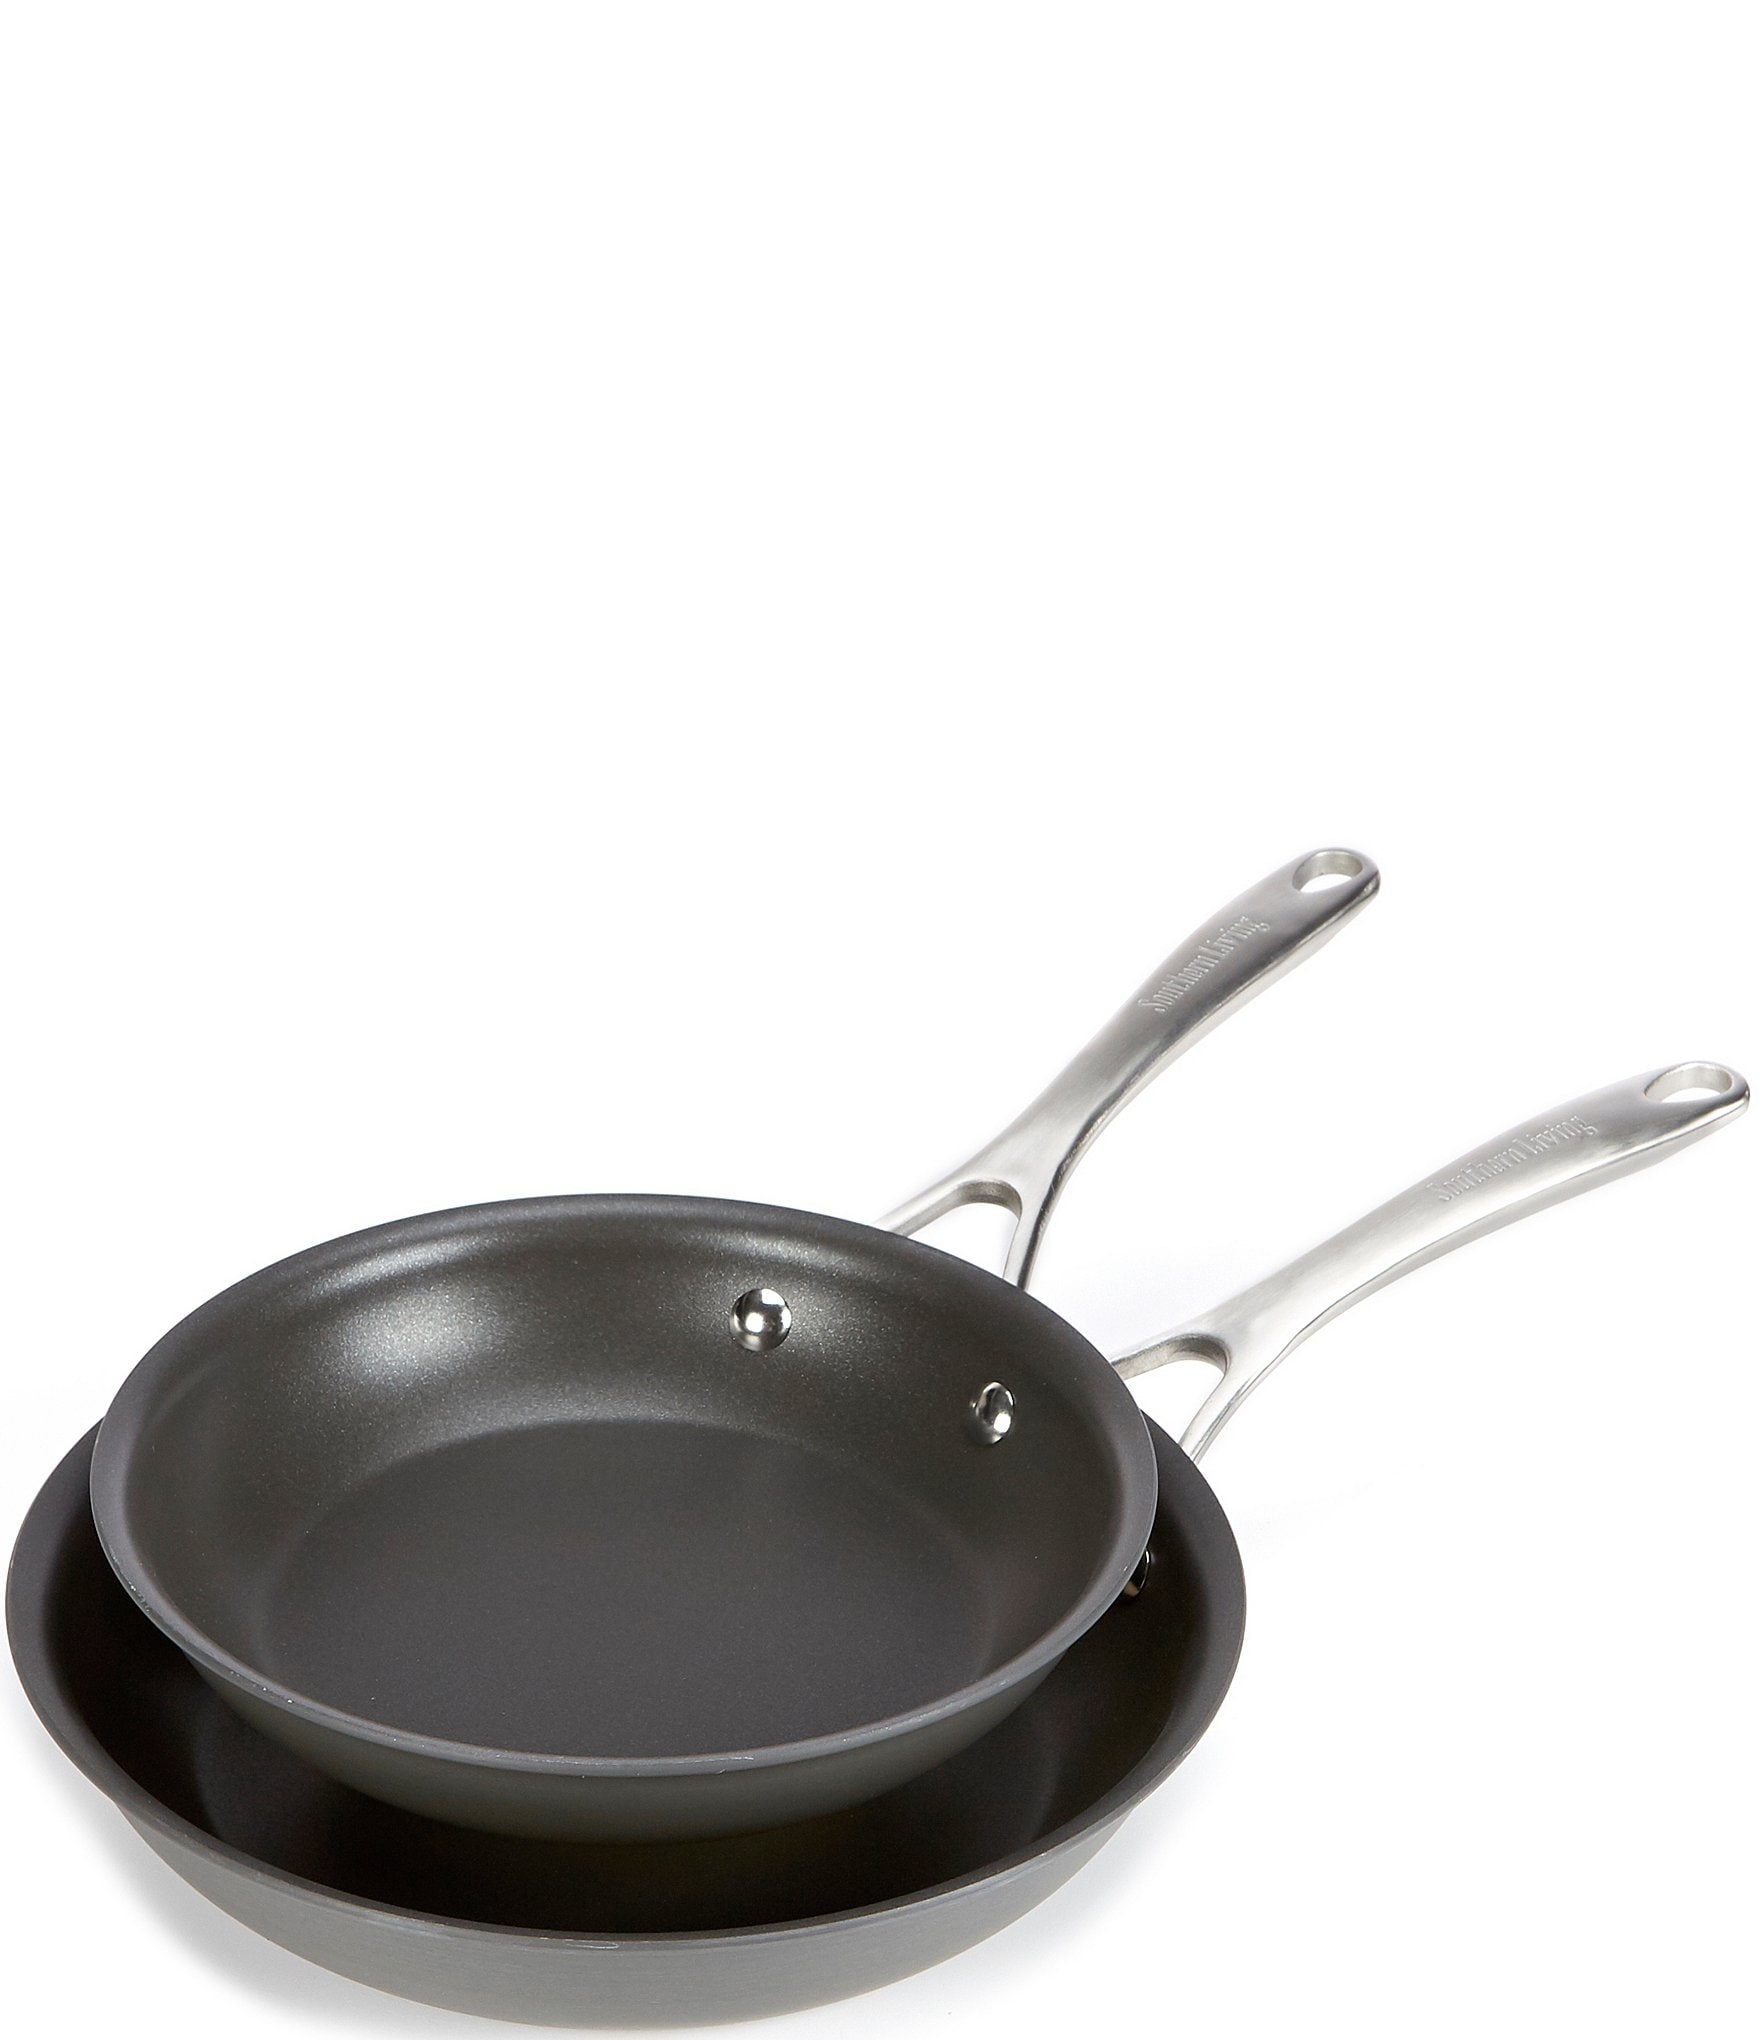 Southern Living Kitchen Solution Collection Hard-Anodized Nonstick